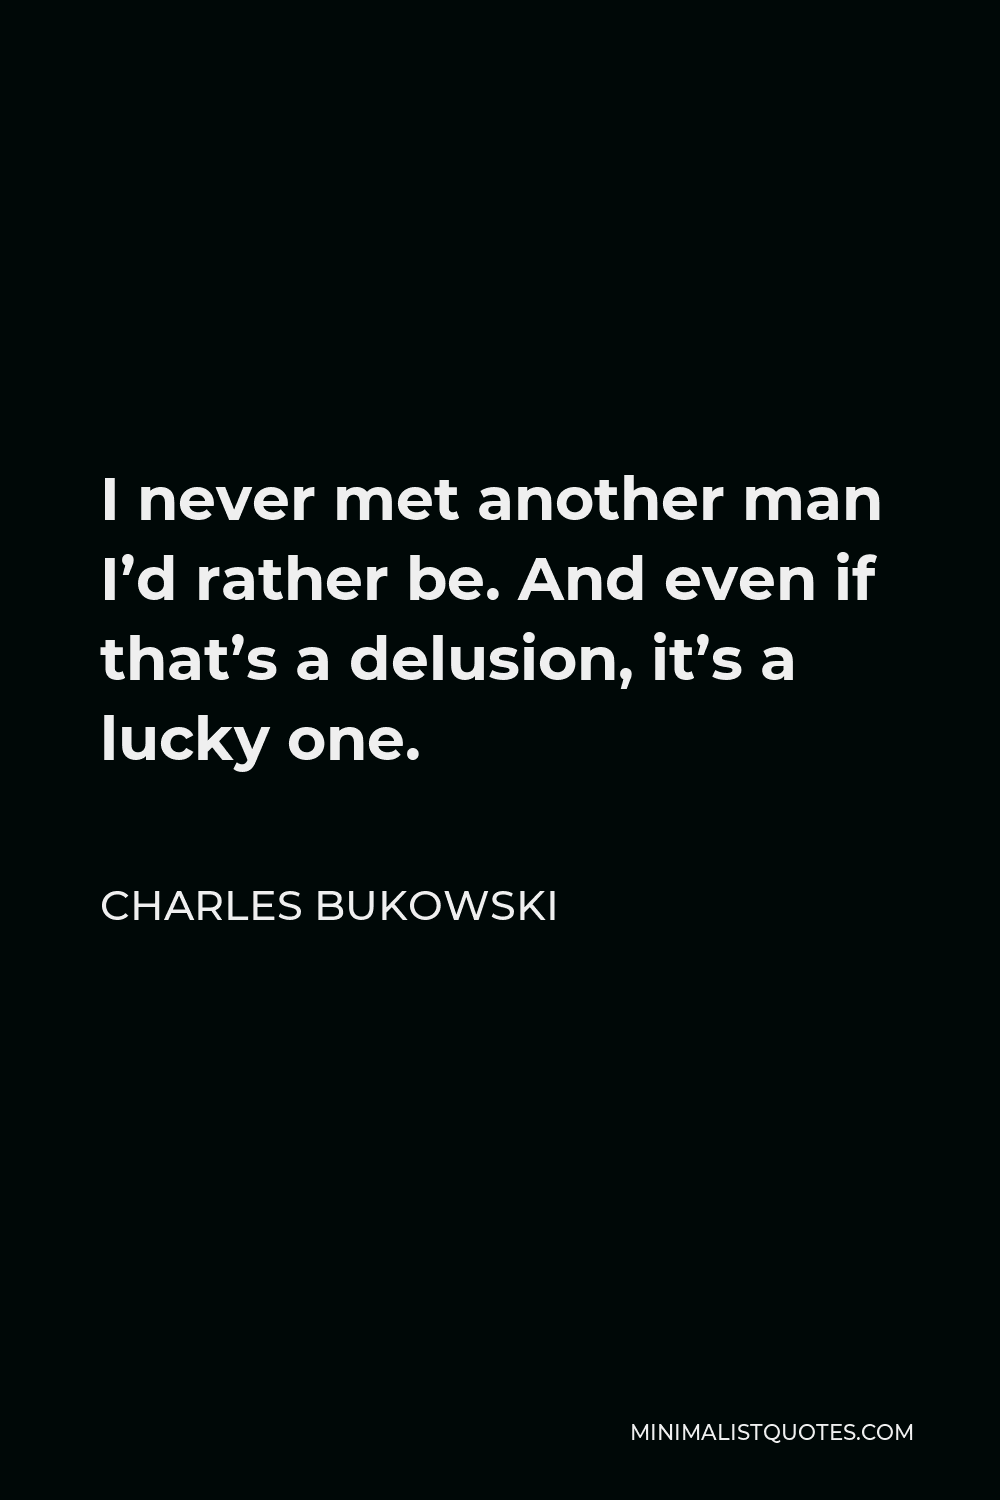 Charles Bukowski Quote - I never met another man I’d rather be. And even if that’s a delusion, it’s a lucky one.